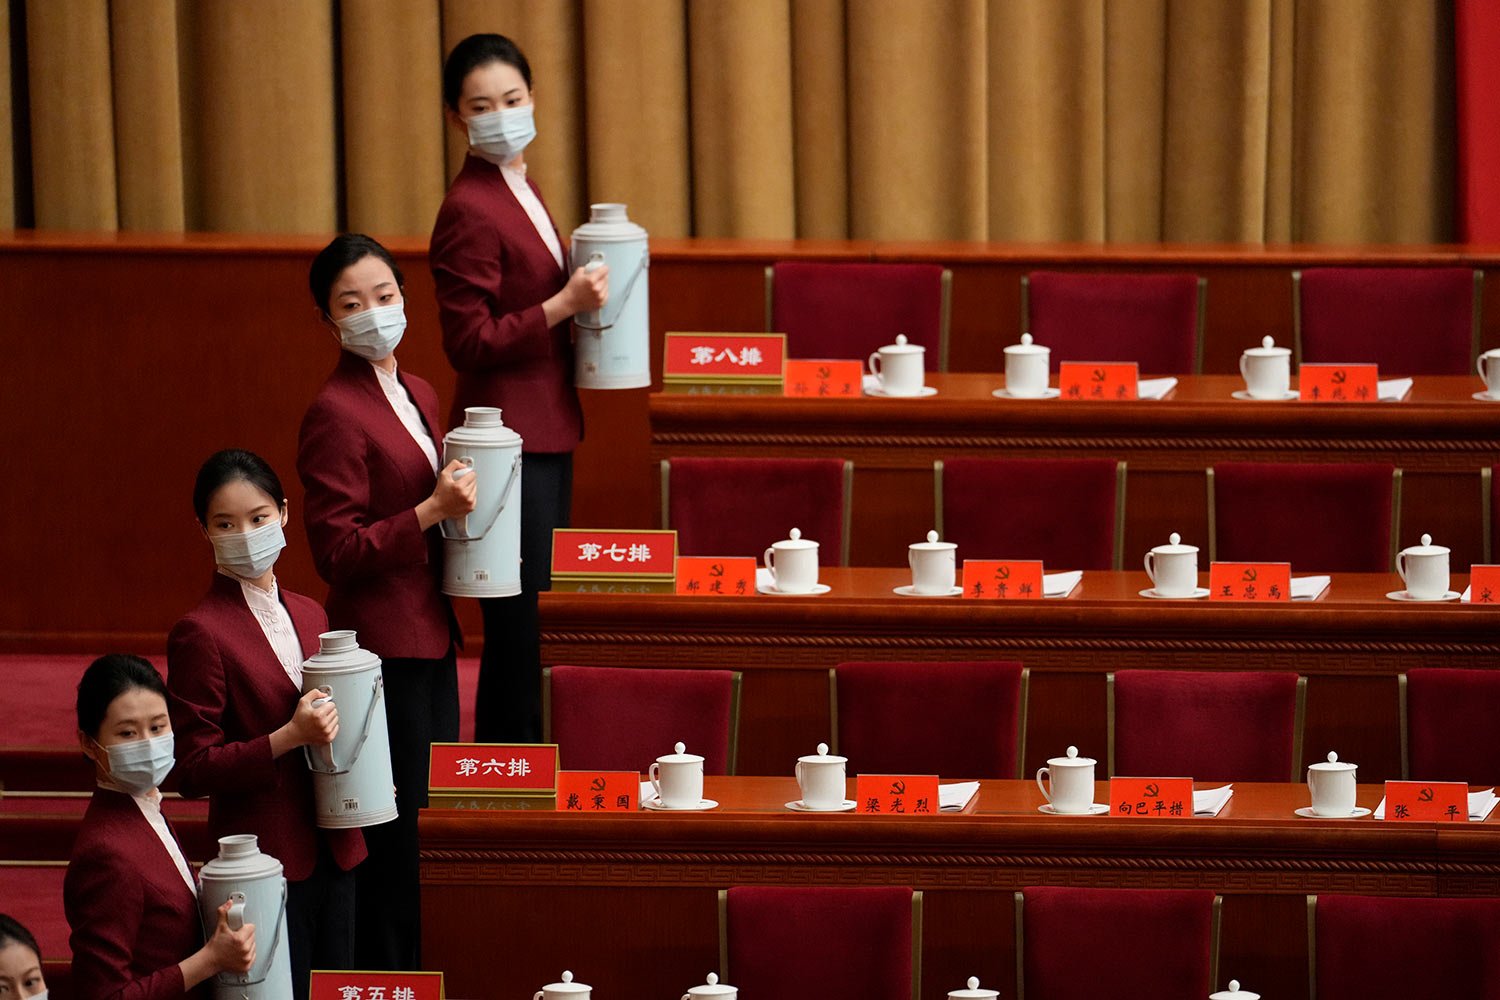  Hostesses prepare drinks at the Great Hall of the People before the opening ceremony for the 20th National Congress of China's ruling Communist Party in Beijing, China, Sunday, Oct. 16, 2022.  (AP Photo/Mark Schiefelbein) 